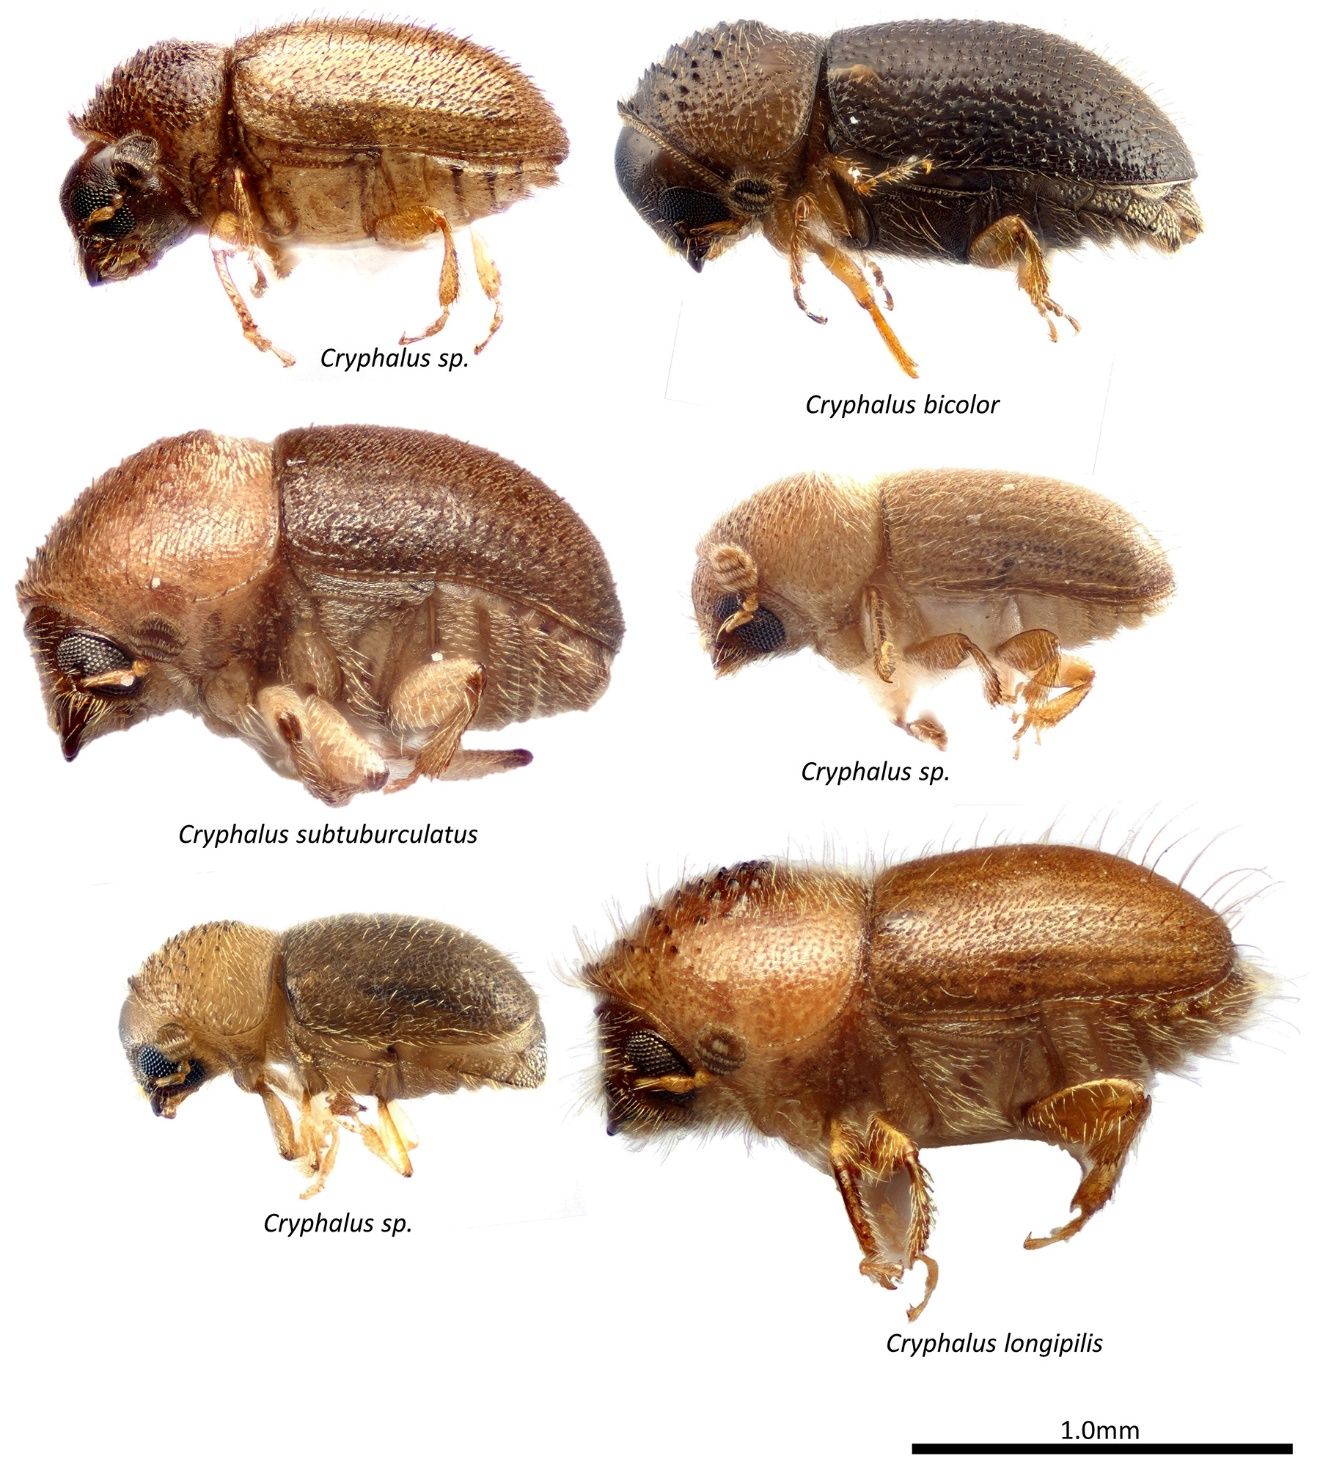 Examples of Cryphalus species found in New Guinea. 